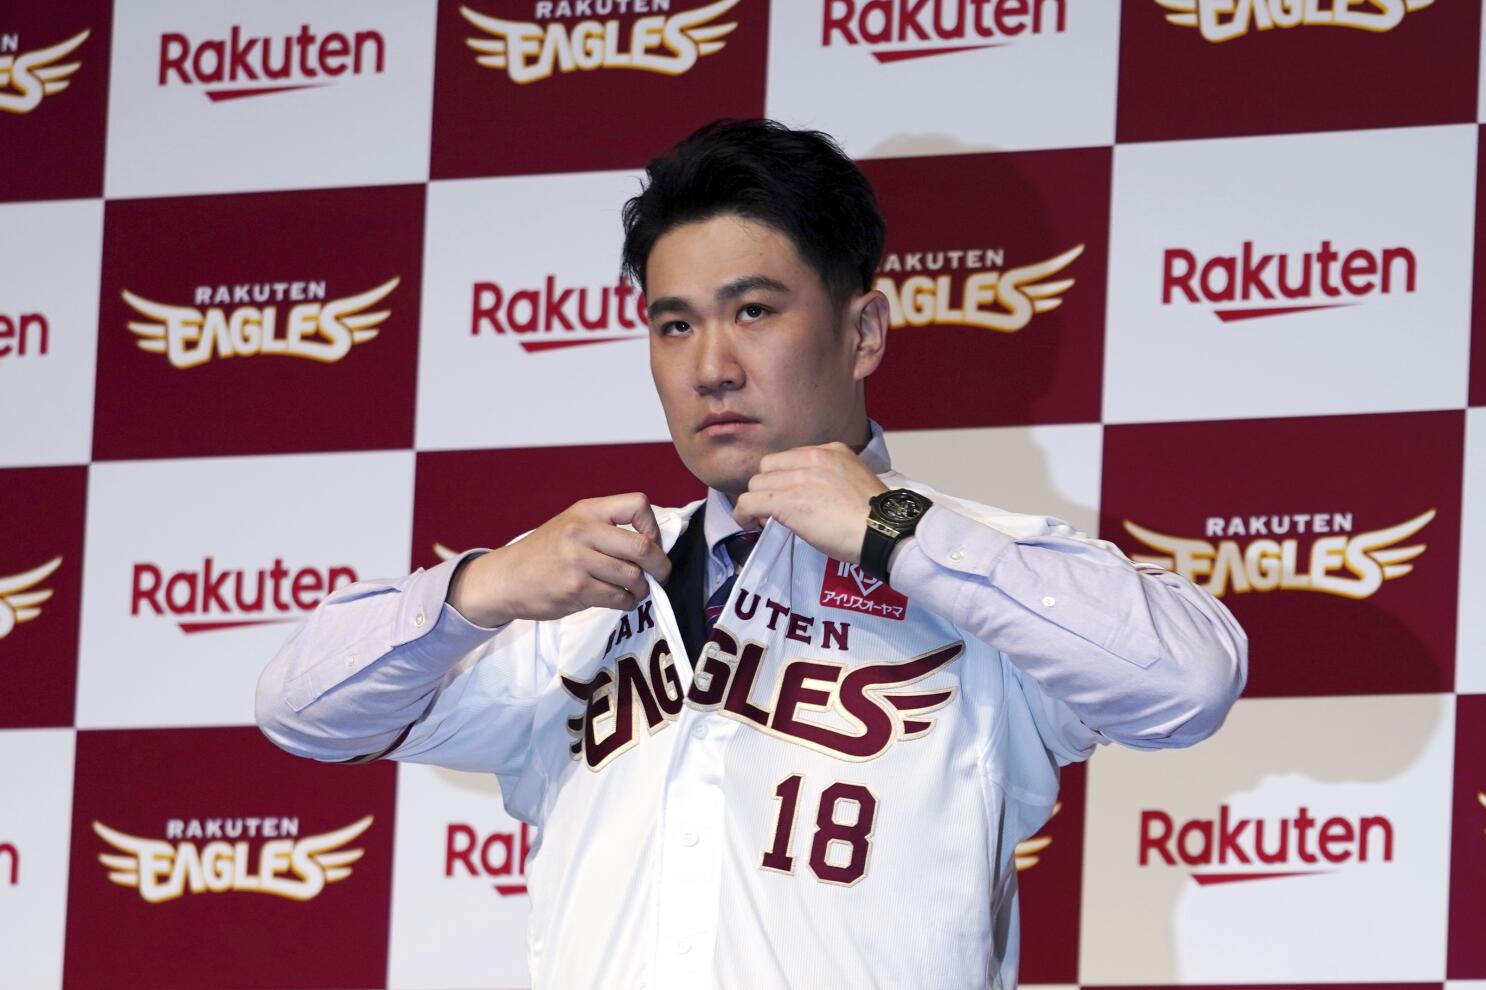 My Rakuten Eagles Jersey (So Far). Although they keep me